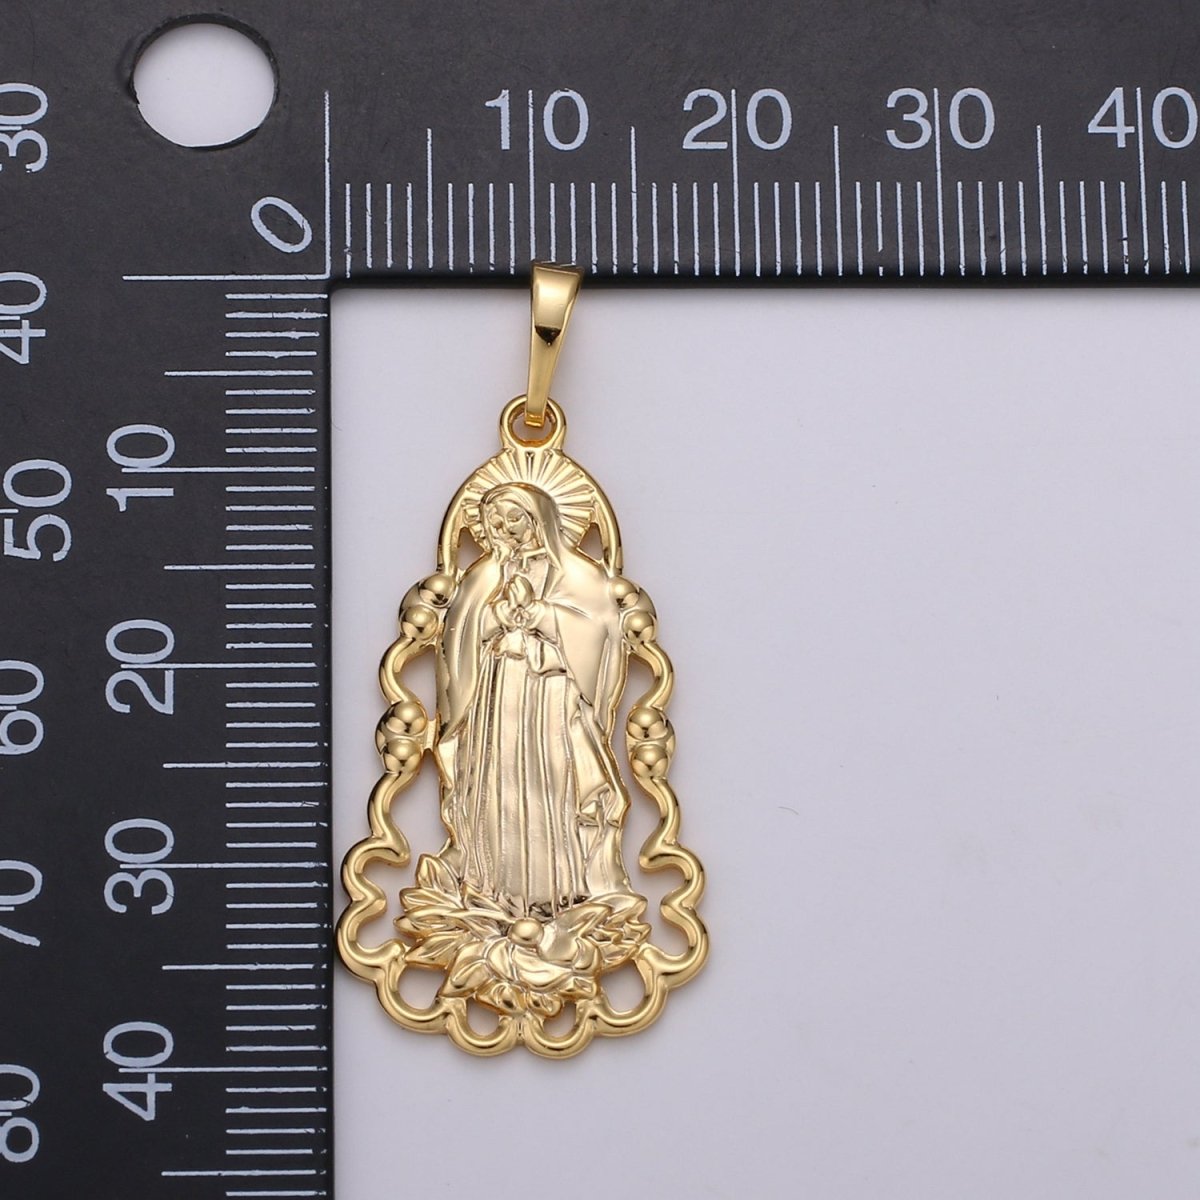 24K Guadalupe Pendant â€¢ Yellow Gold Lady of Guadalupe Pendant â€¢ Religious Pendant â€¢ Gold Virgin Mary Pendant Necklace J-122 - DLUXCA